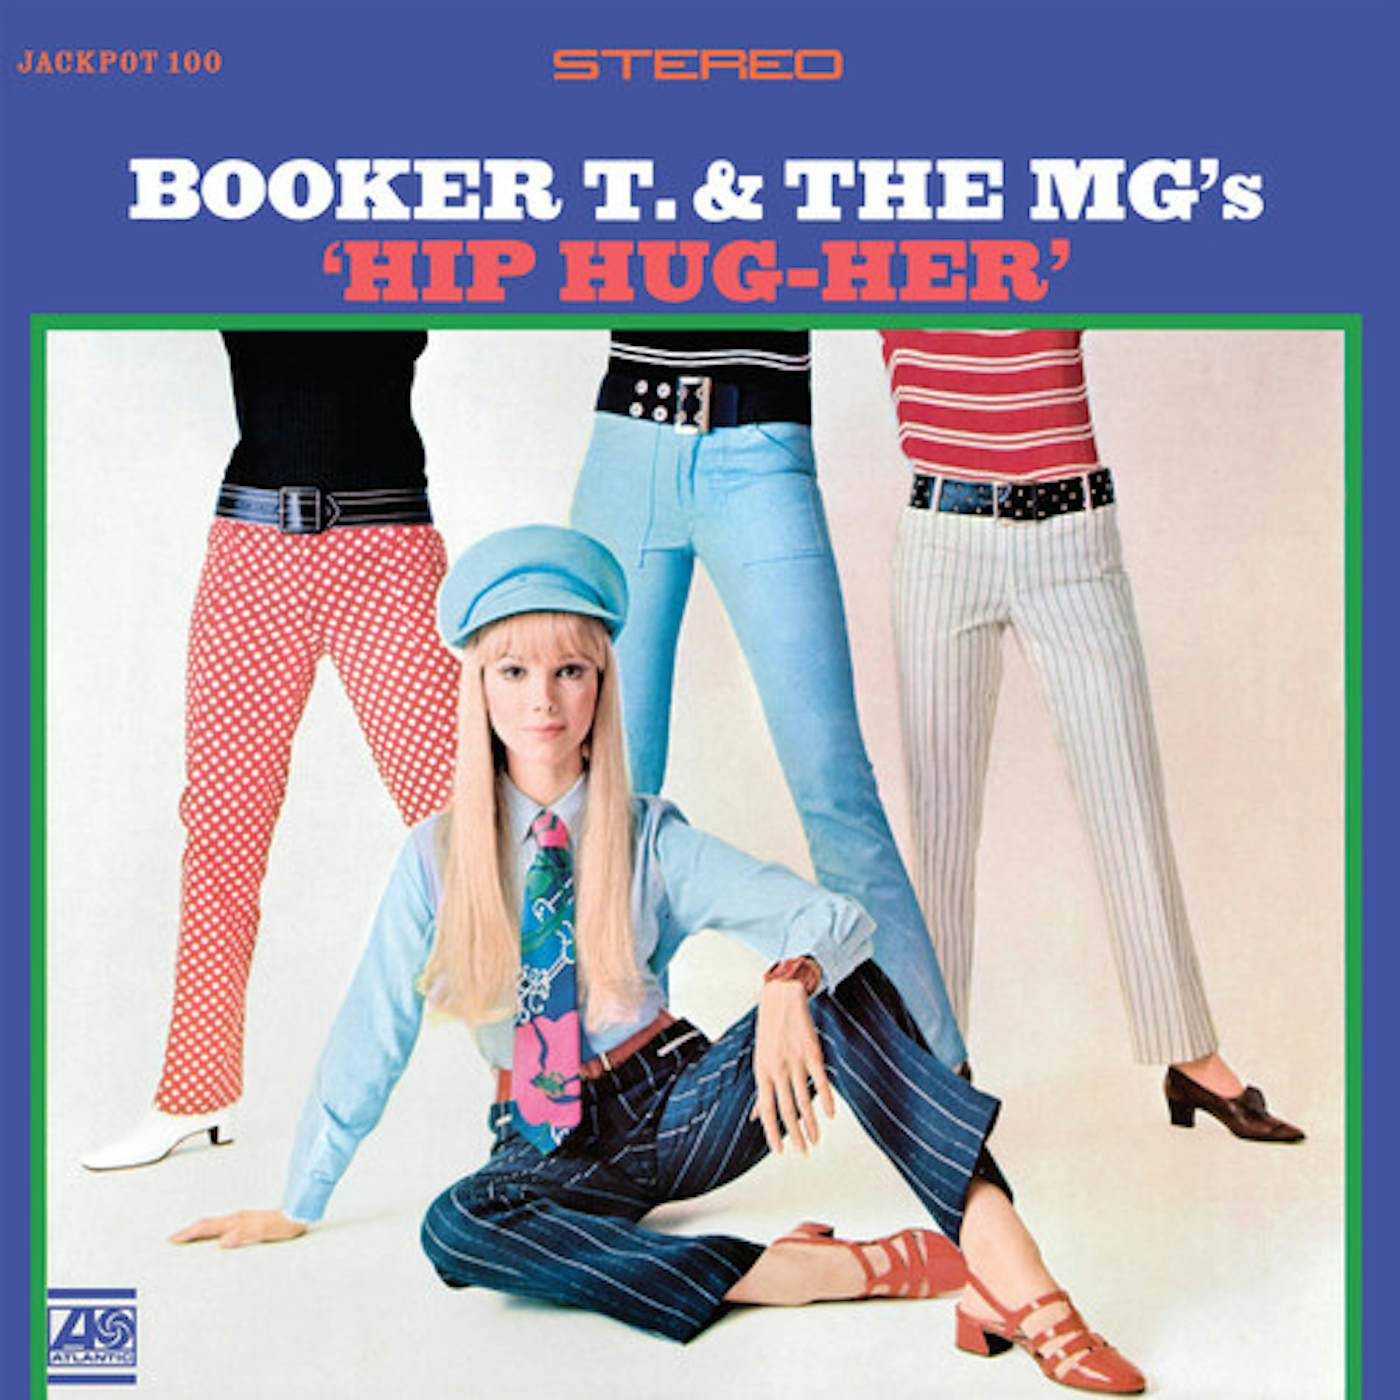 Booker T. & the M.G.'s Hip Hug-her (Limited Hot Pink) Vinyl Record